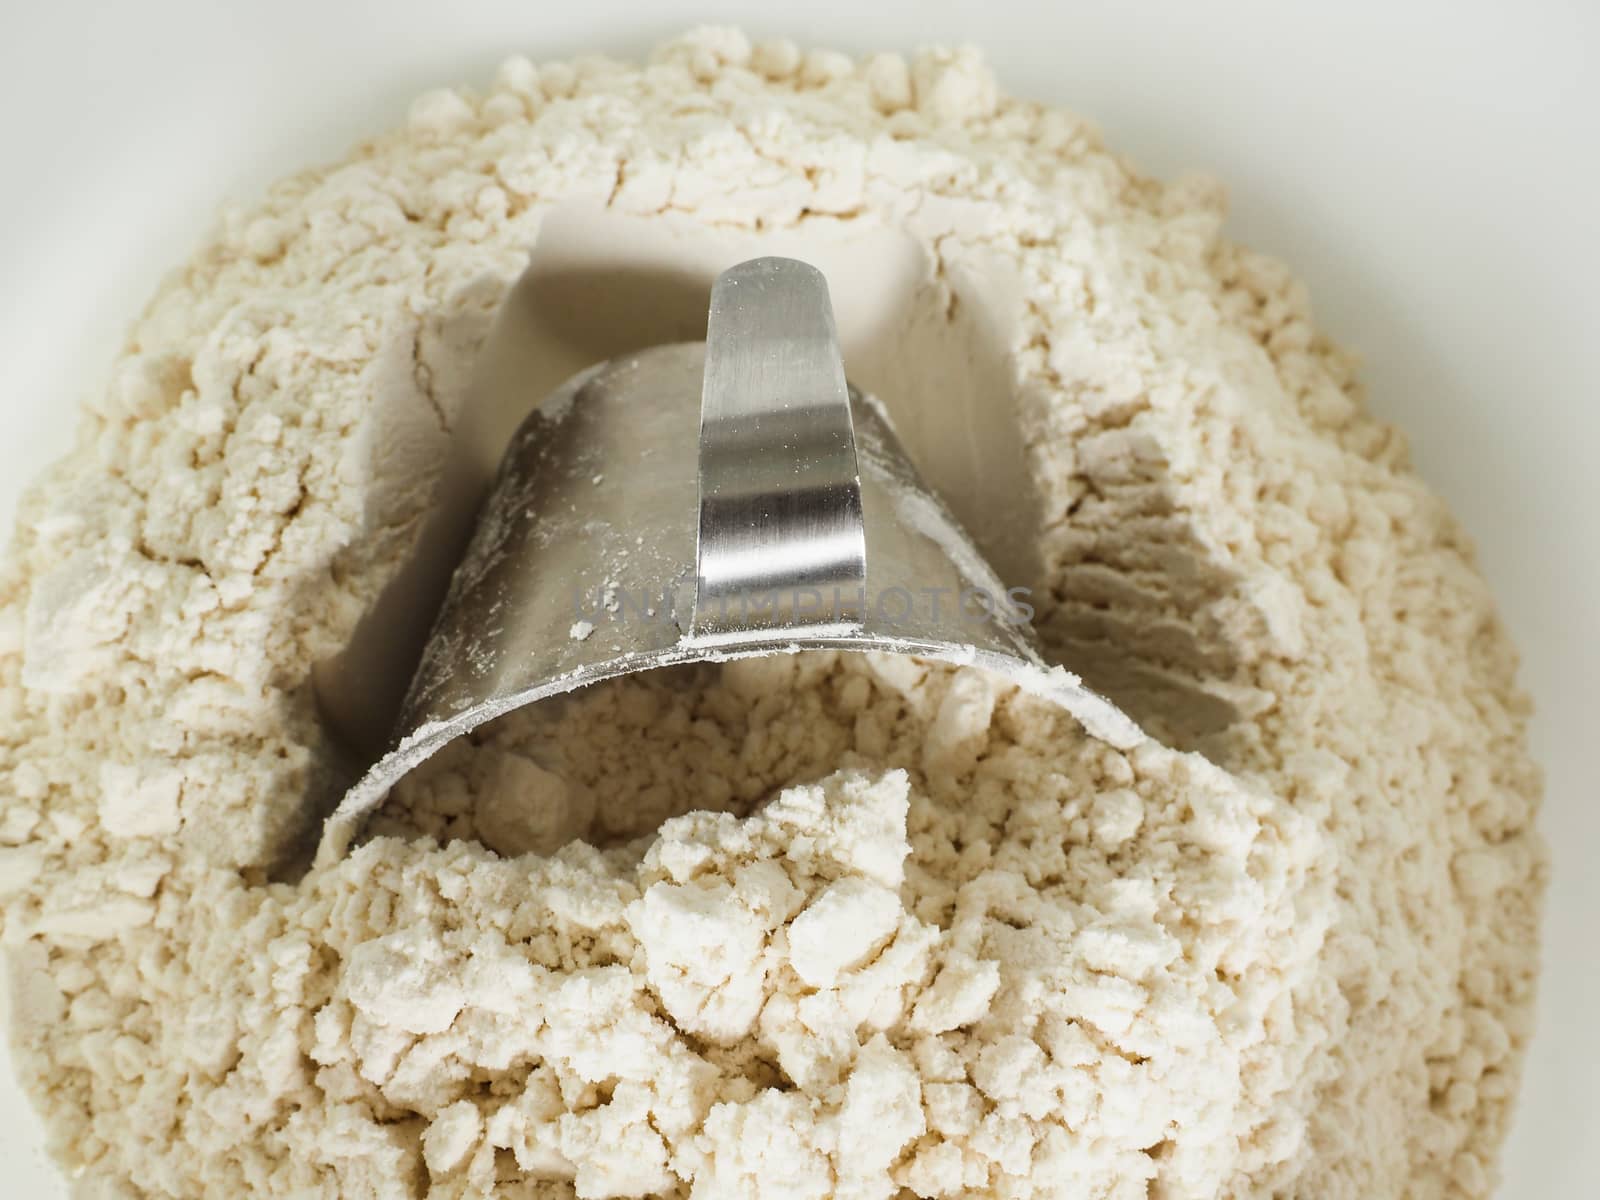 Measurement tool in a bowl of wheat flour by Arvebettum